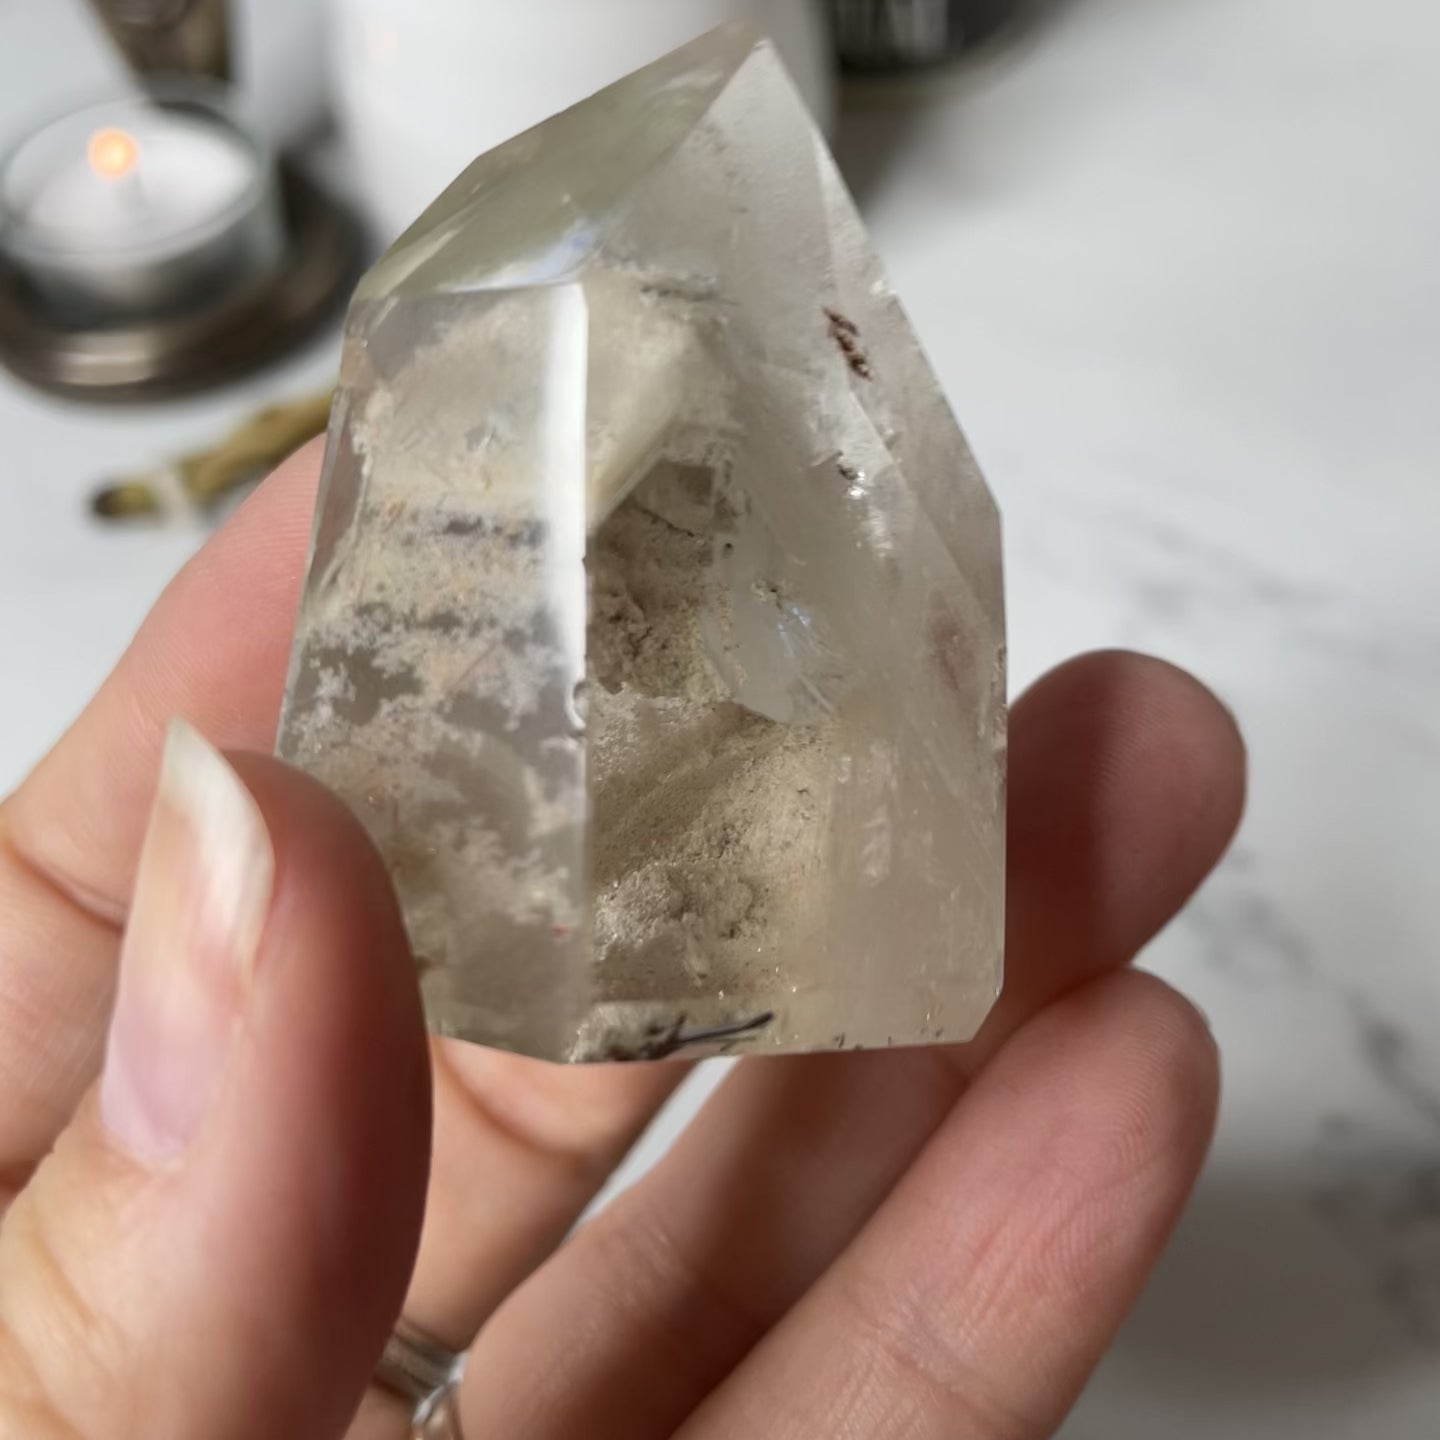 Freya's Haven | Metaphysical & Crystal shop | A close up video of a Lodalite  crystal held in a woman's hand with candles in the background.